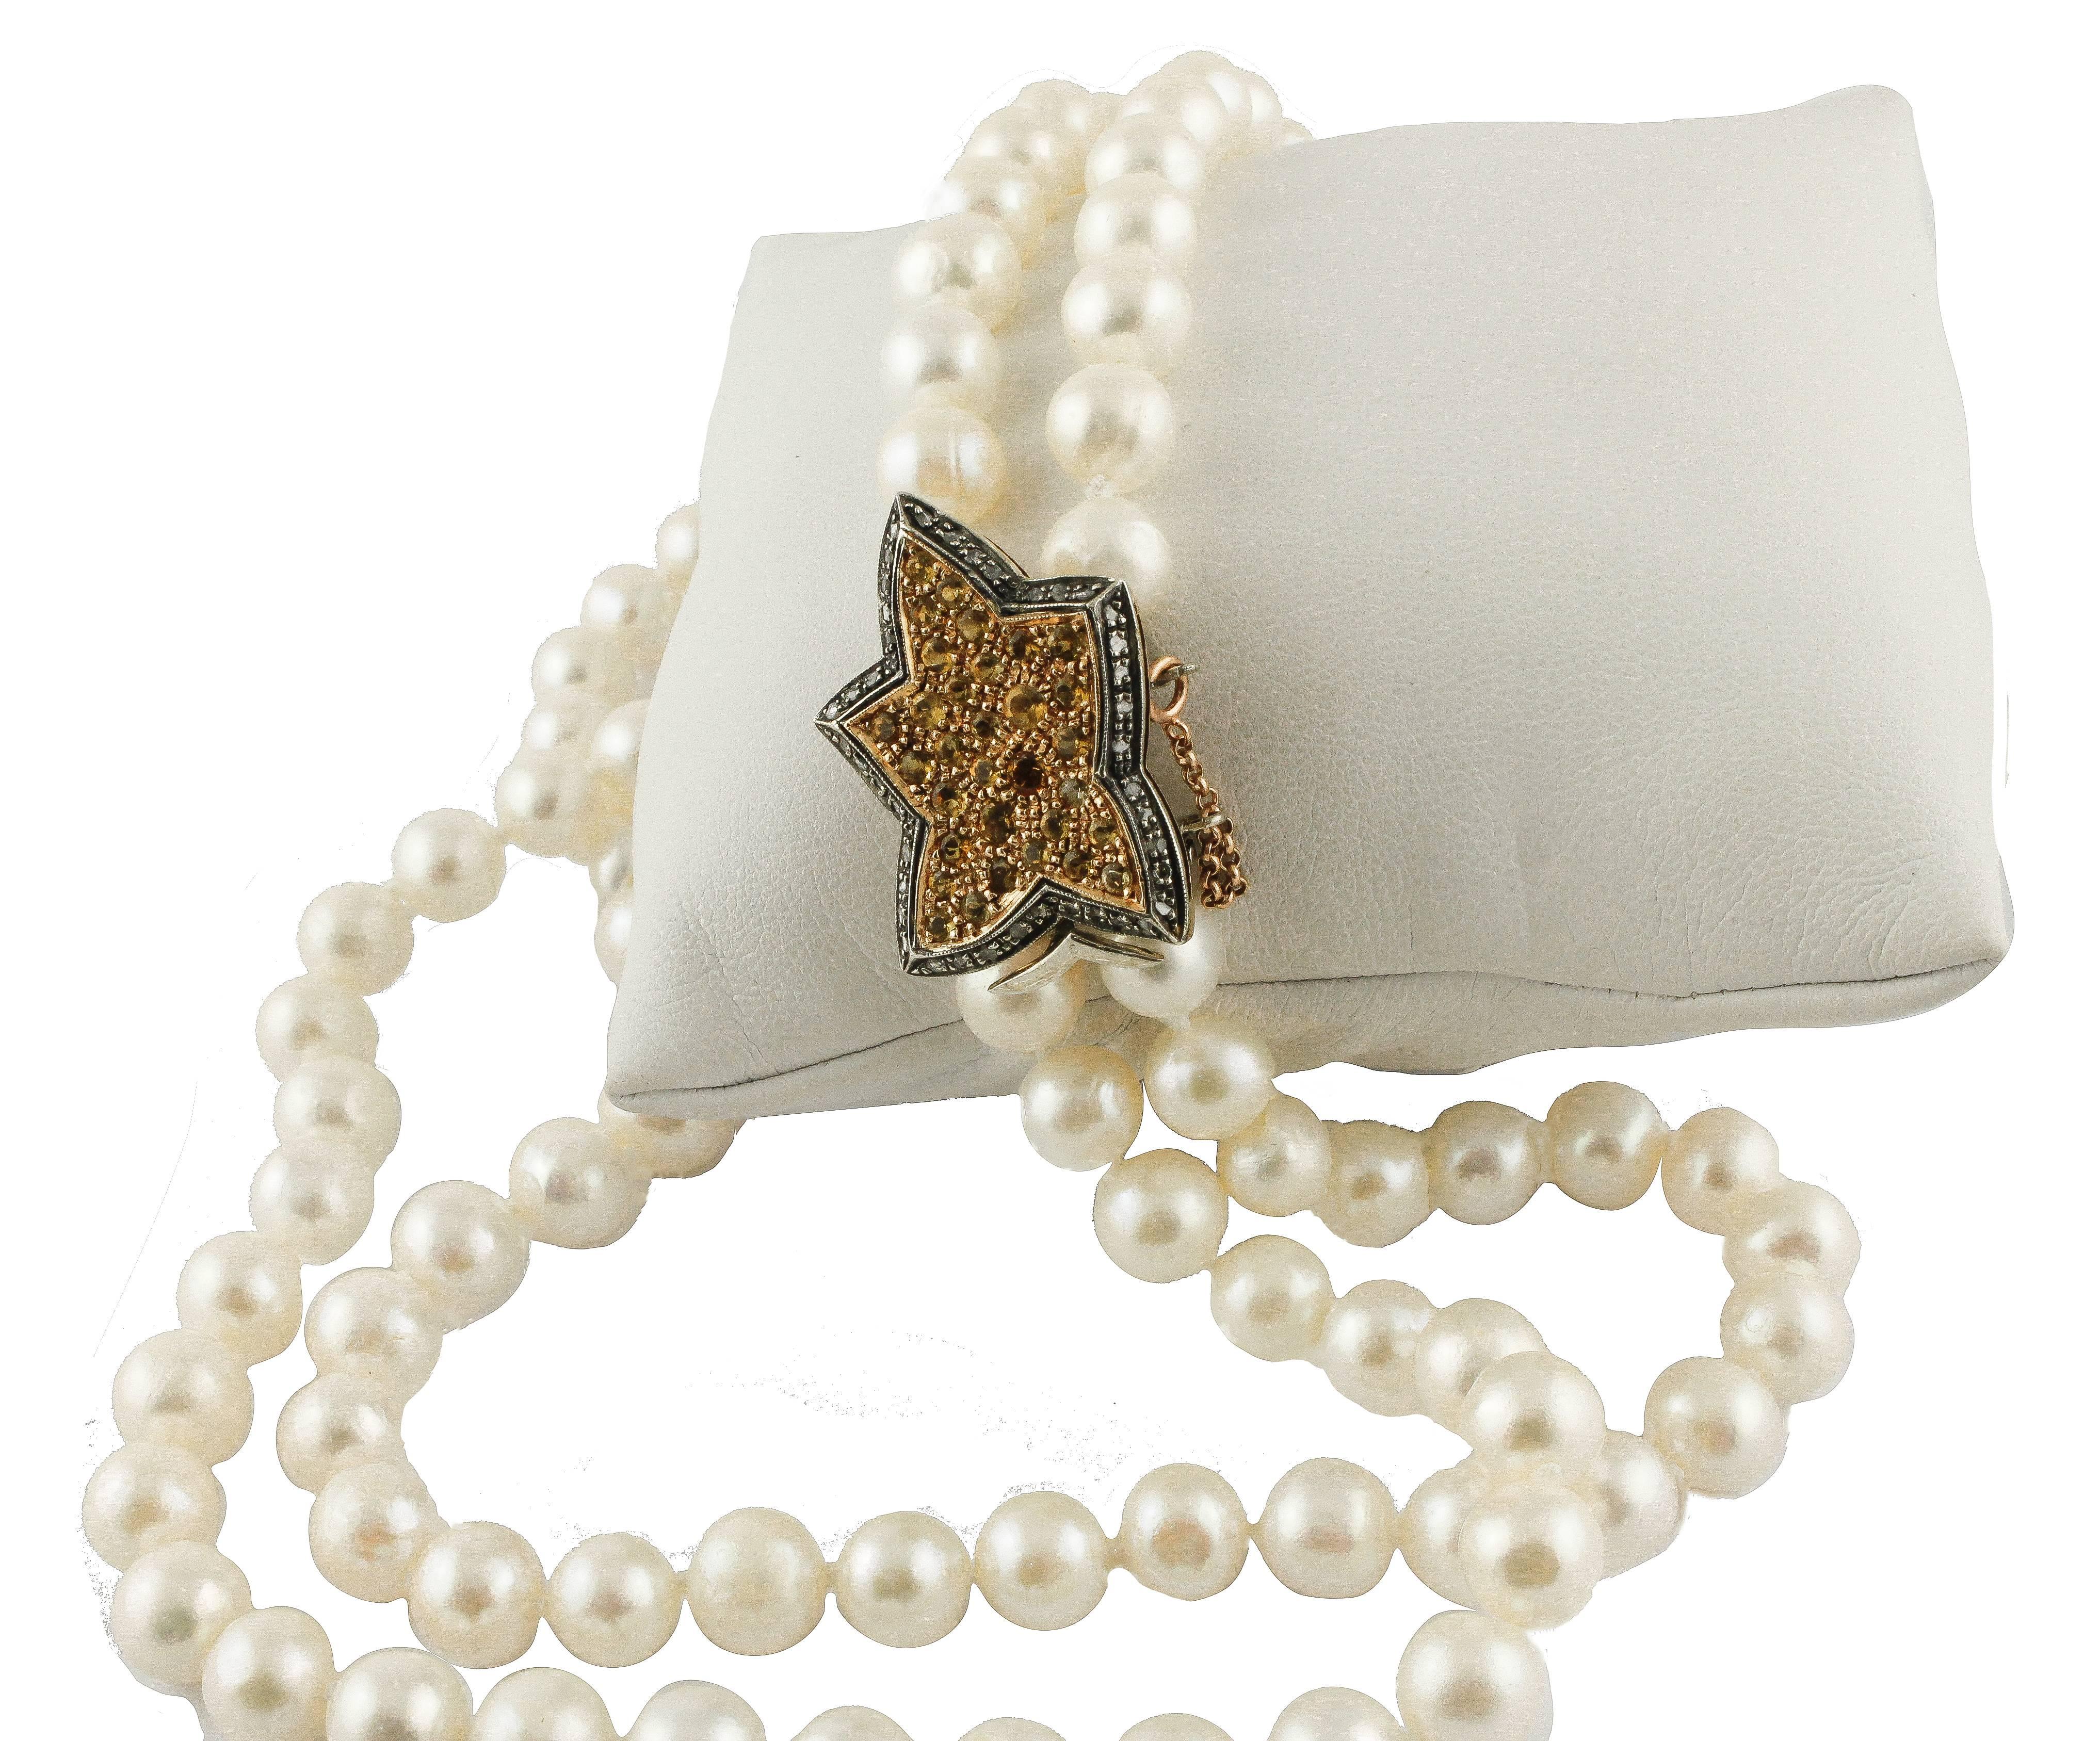 Round Cut Diamonds Topazes Pearls White Rose Gold and Silver Beaded Necklace For Sale